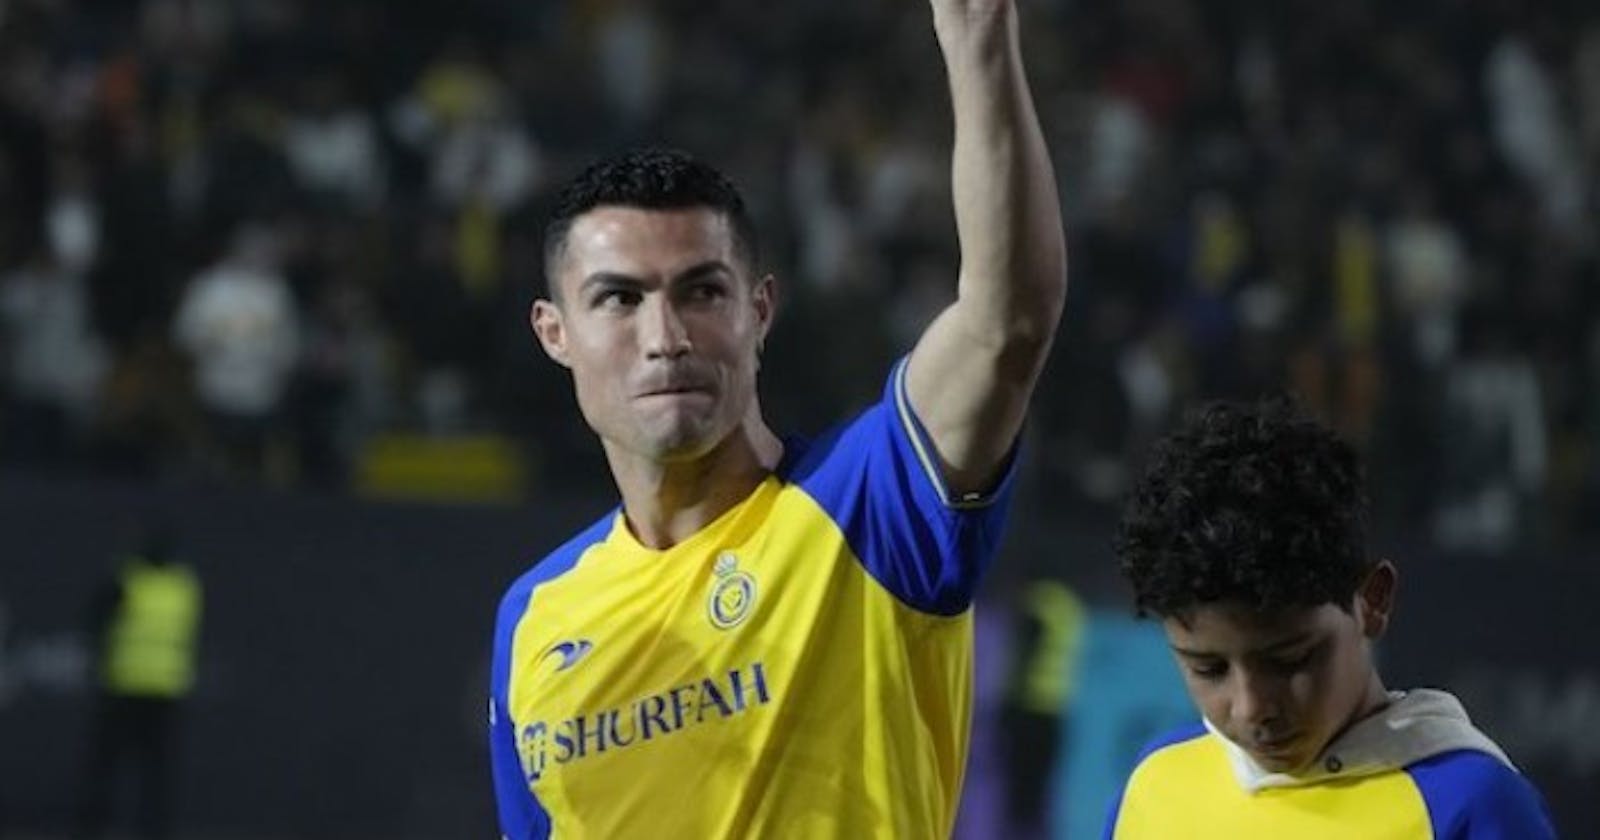 Moving to Al Nassr, Cristiano Ronaldo 'Divorced' with The Agent Jorge Mendes